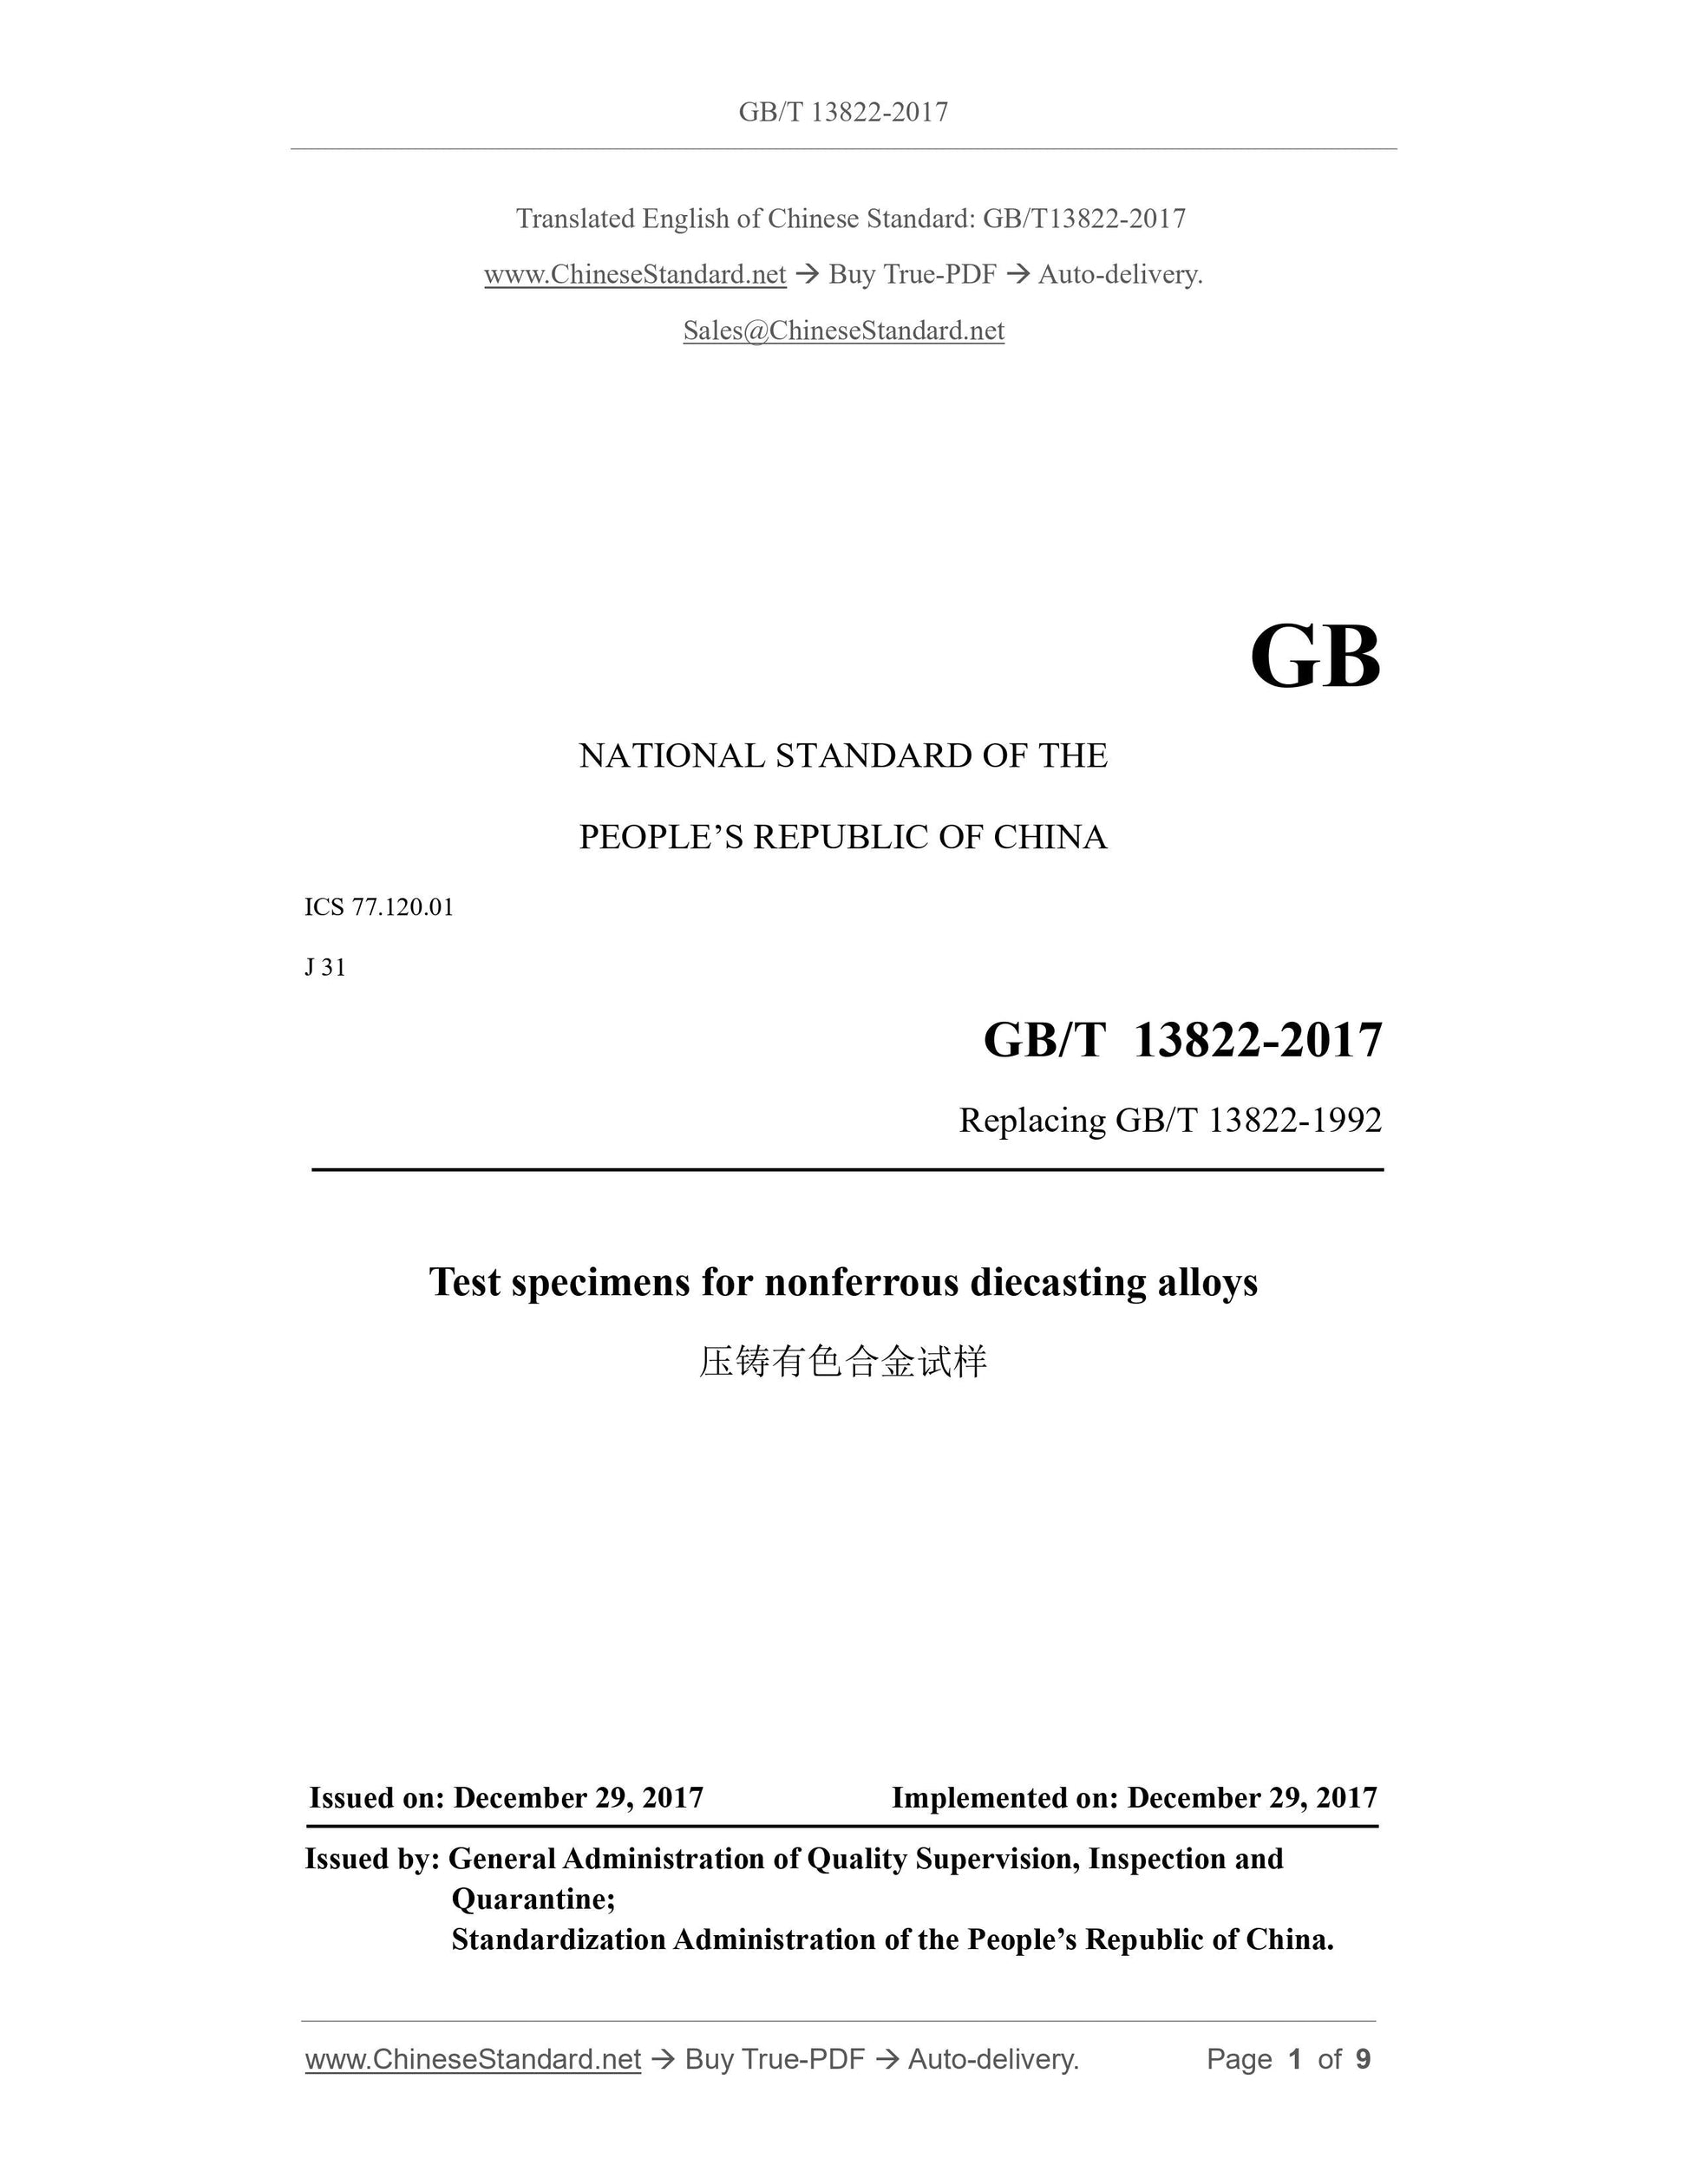 GB/T 13822-2017 Page 1